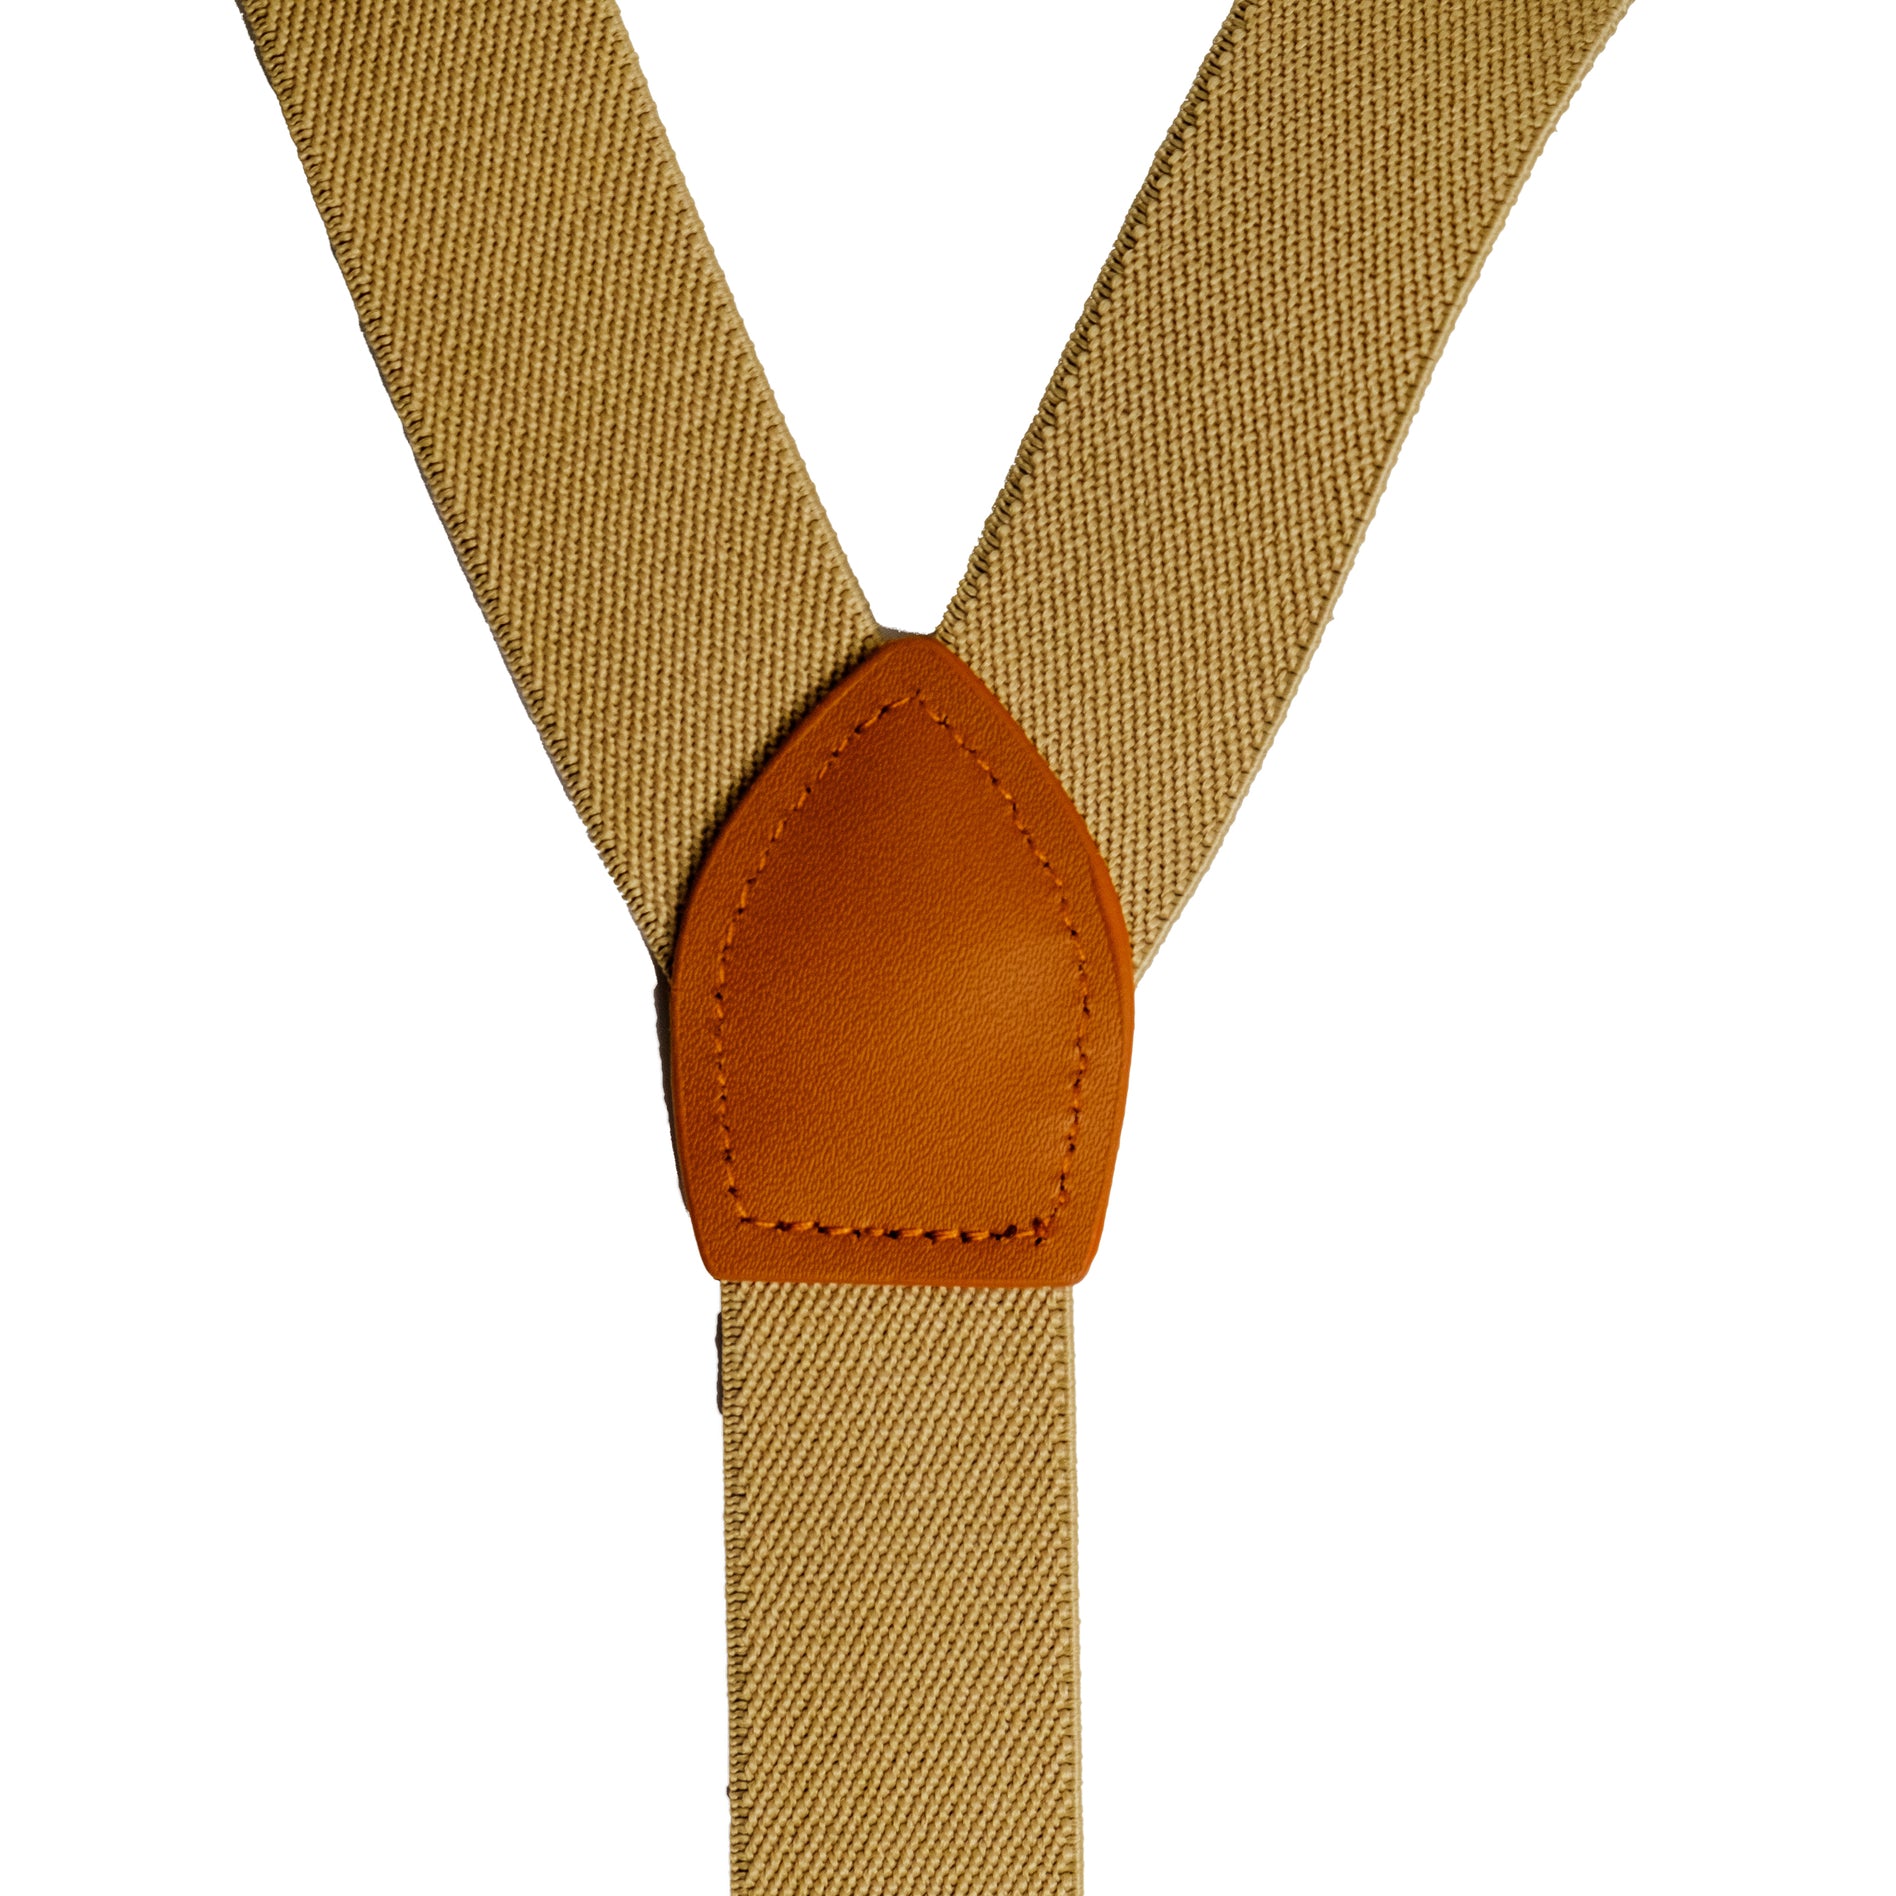 Chokore Y-shaped Suspenders with Leather detailing and adjustable Elastic Strap (Beige)